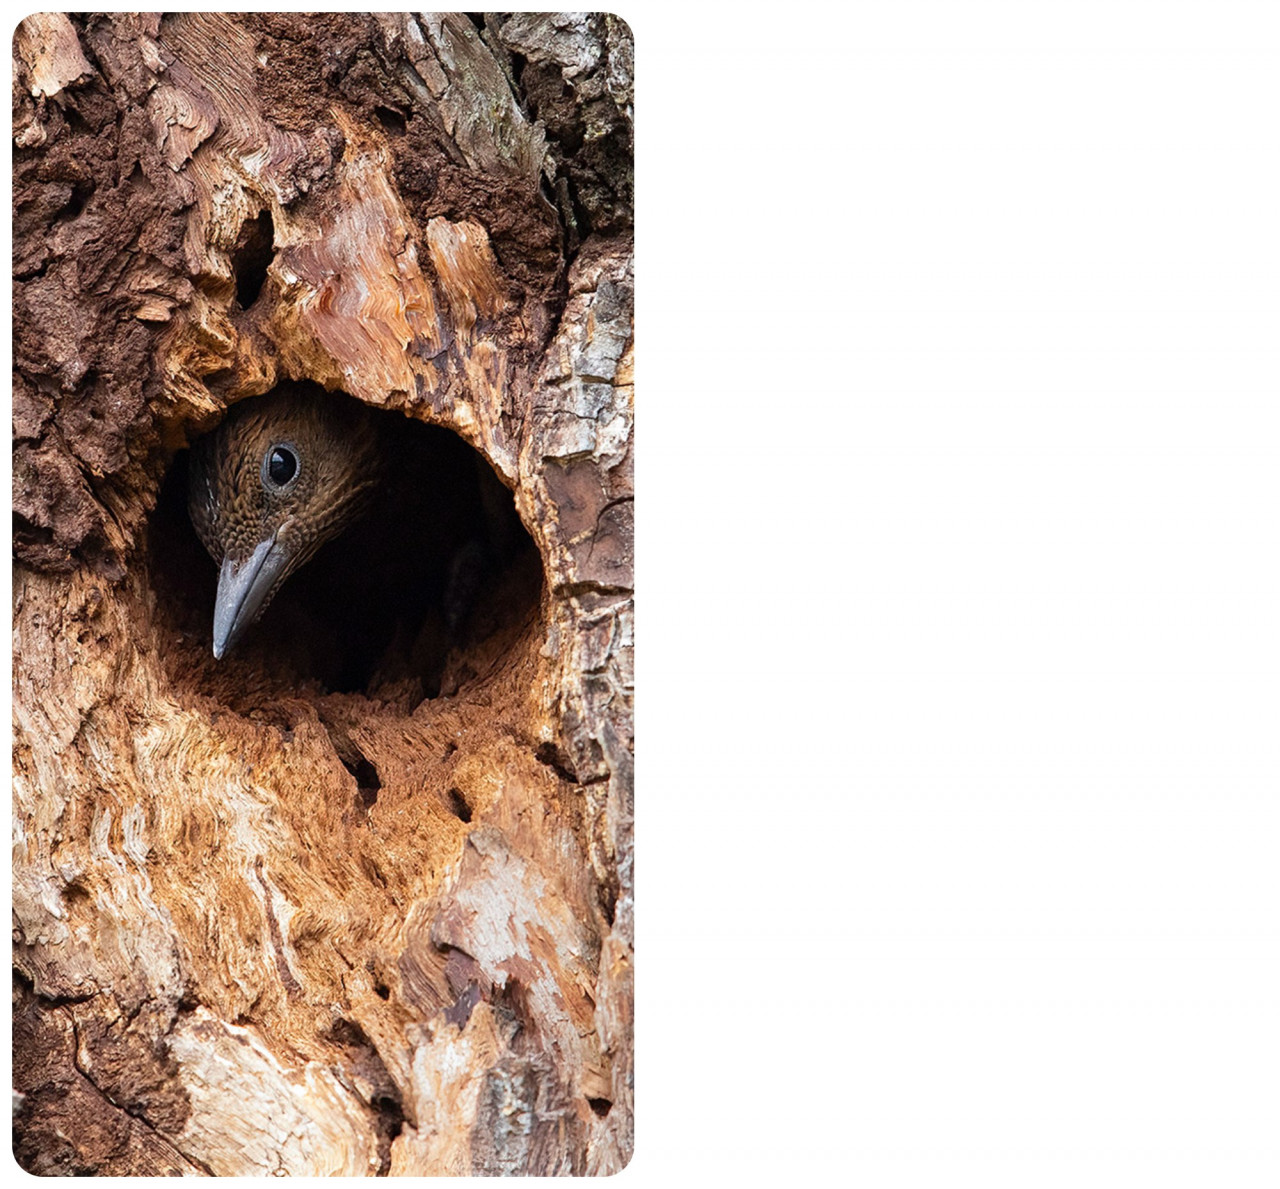 The Rufous Woodpecker has developed the perfect camouflage - it is entirely brown in colour, with the male having just two dashes of rouge on each cheek. Just before they fledge, the chicks become curious of the world around them and will slowly peek out to get a better sense of their environment. – Pic courtesy of Peter Ong